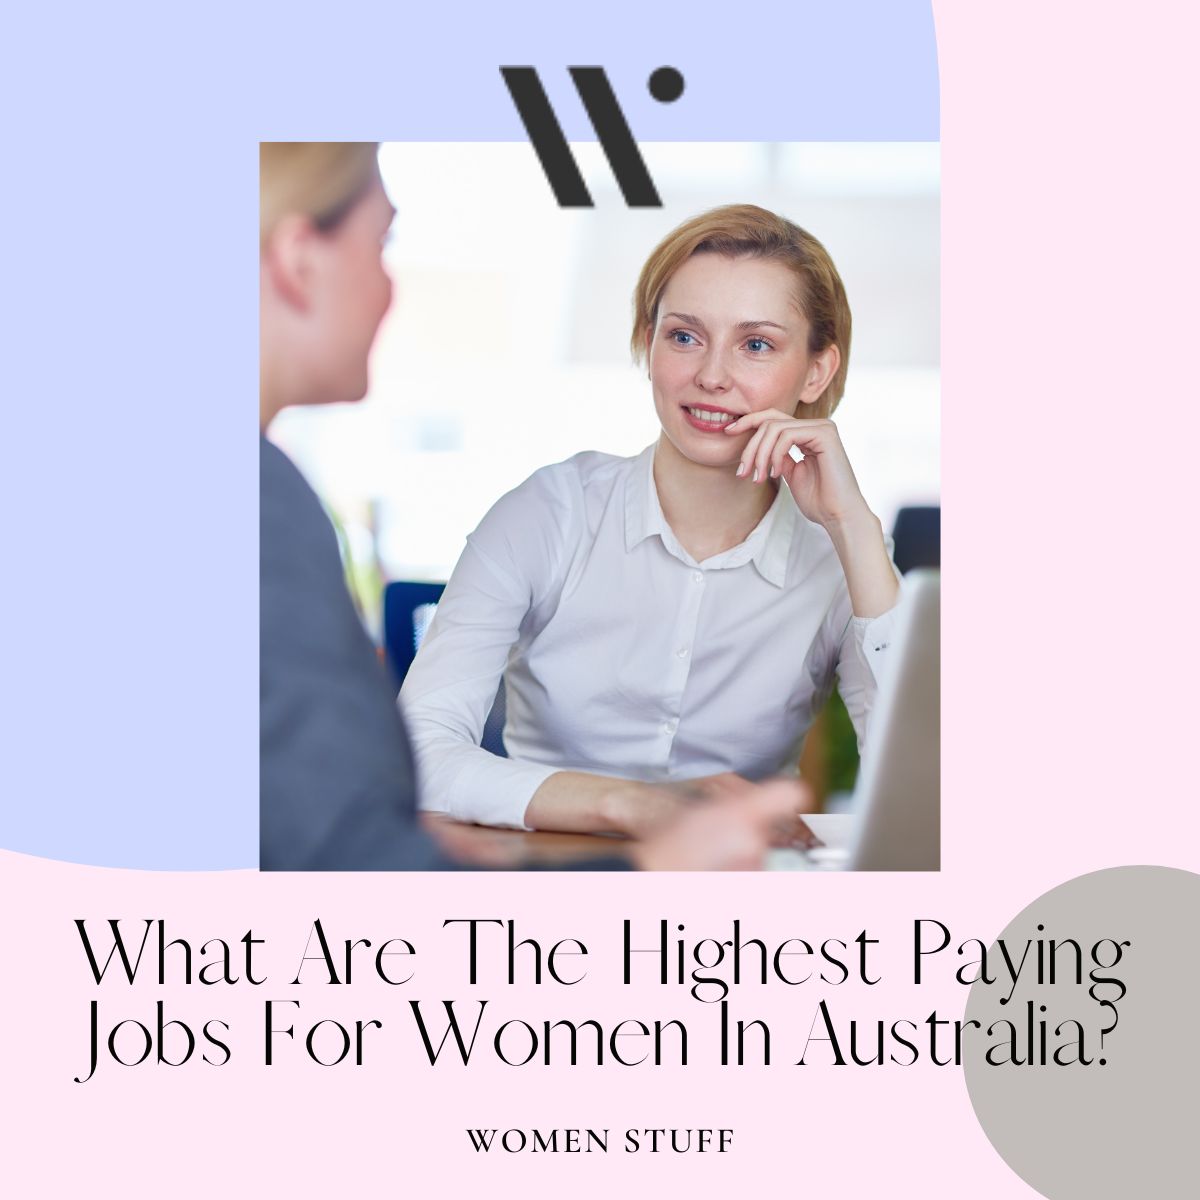 What Are The Highest Paying Jobs For Women In Australia Banner Image - Happy employer looking at young female and listening to her